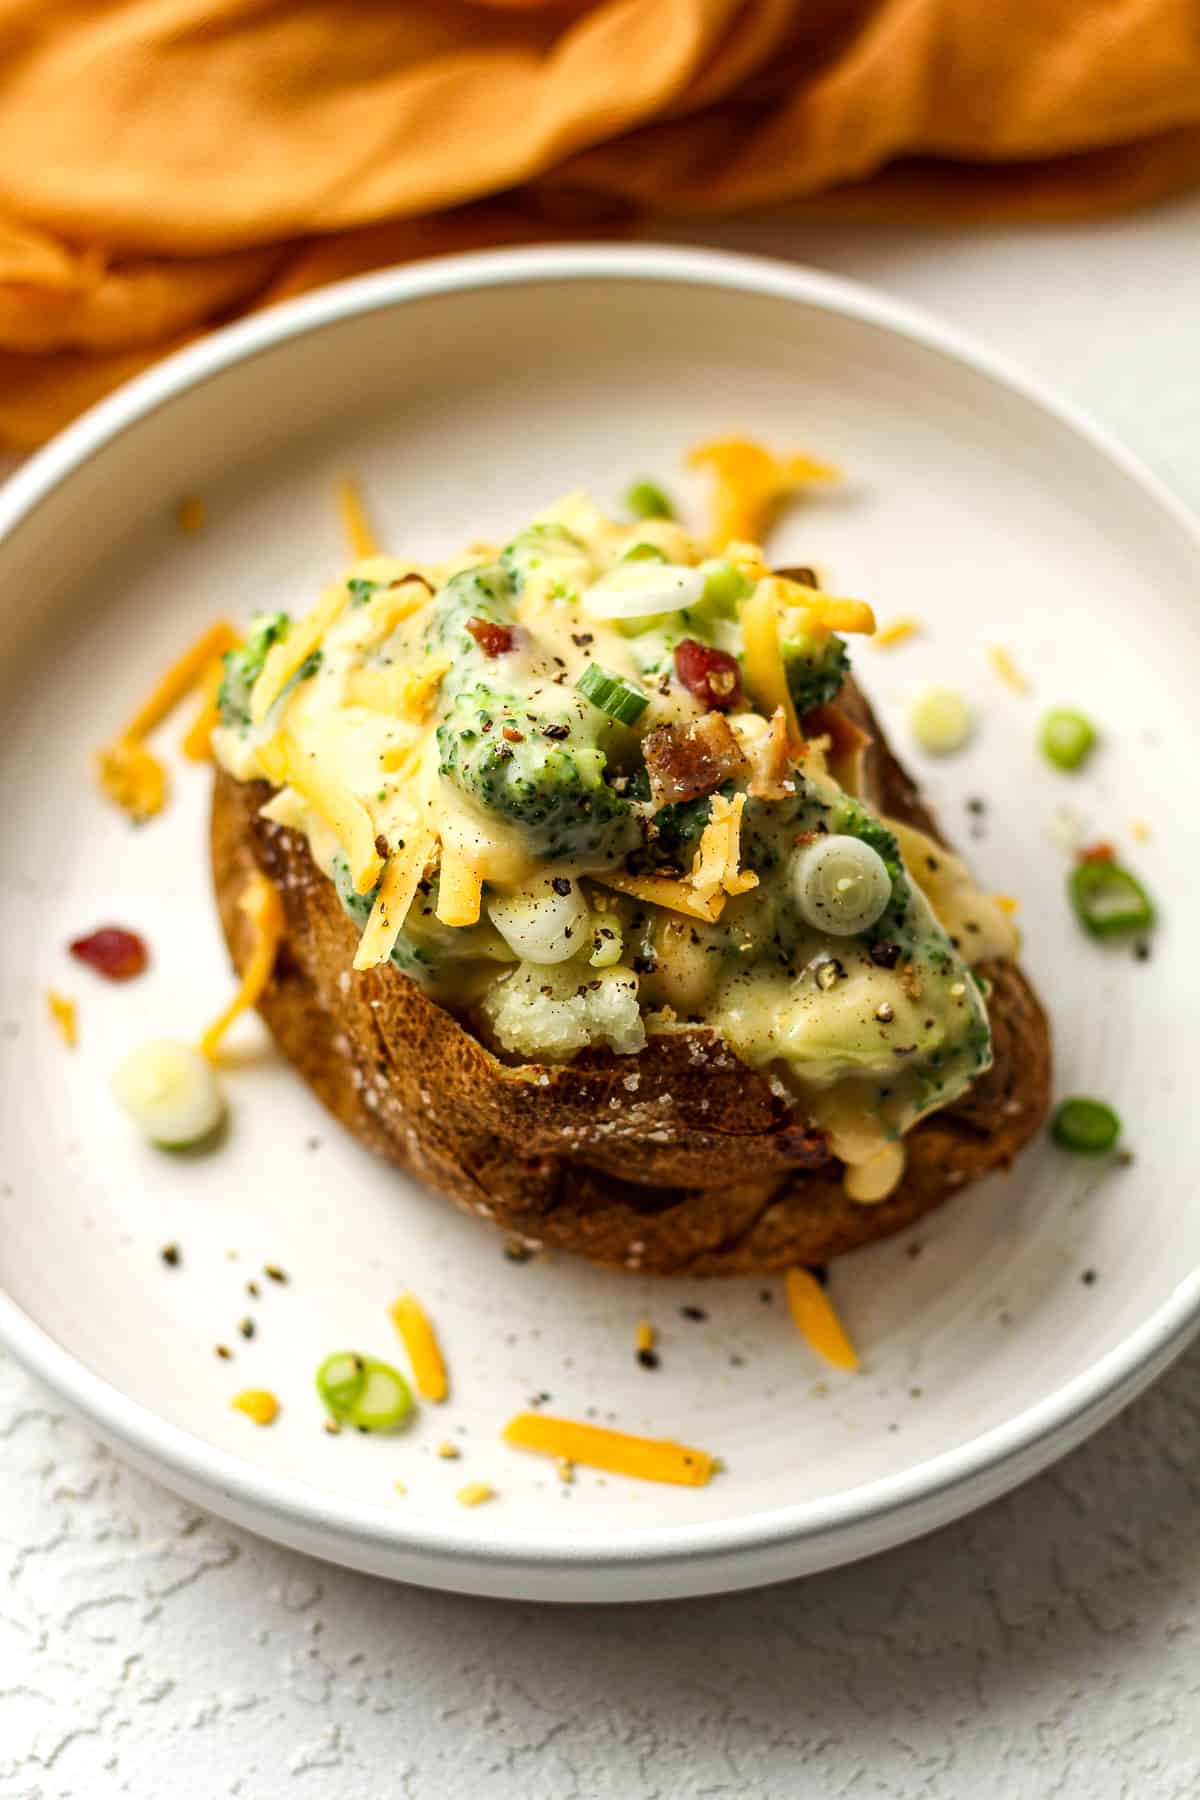 Side view of a loaded baked potato.